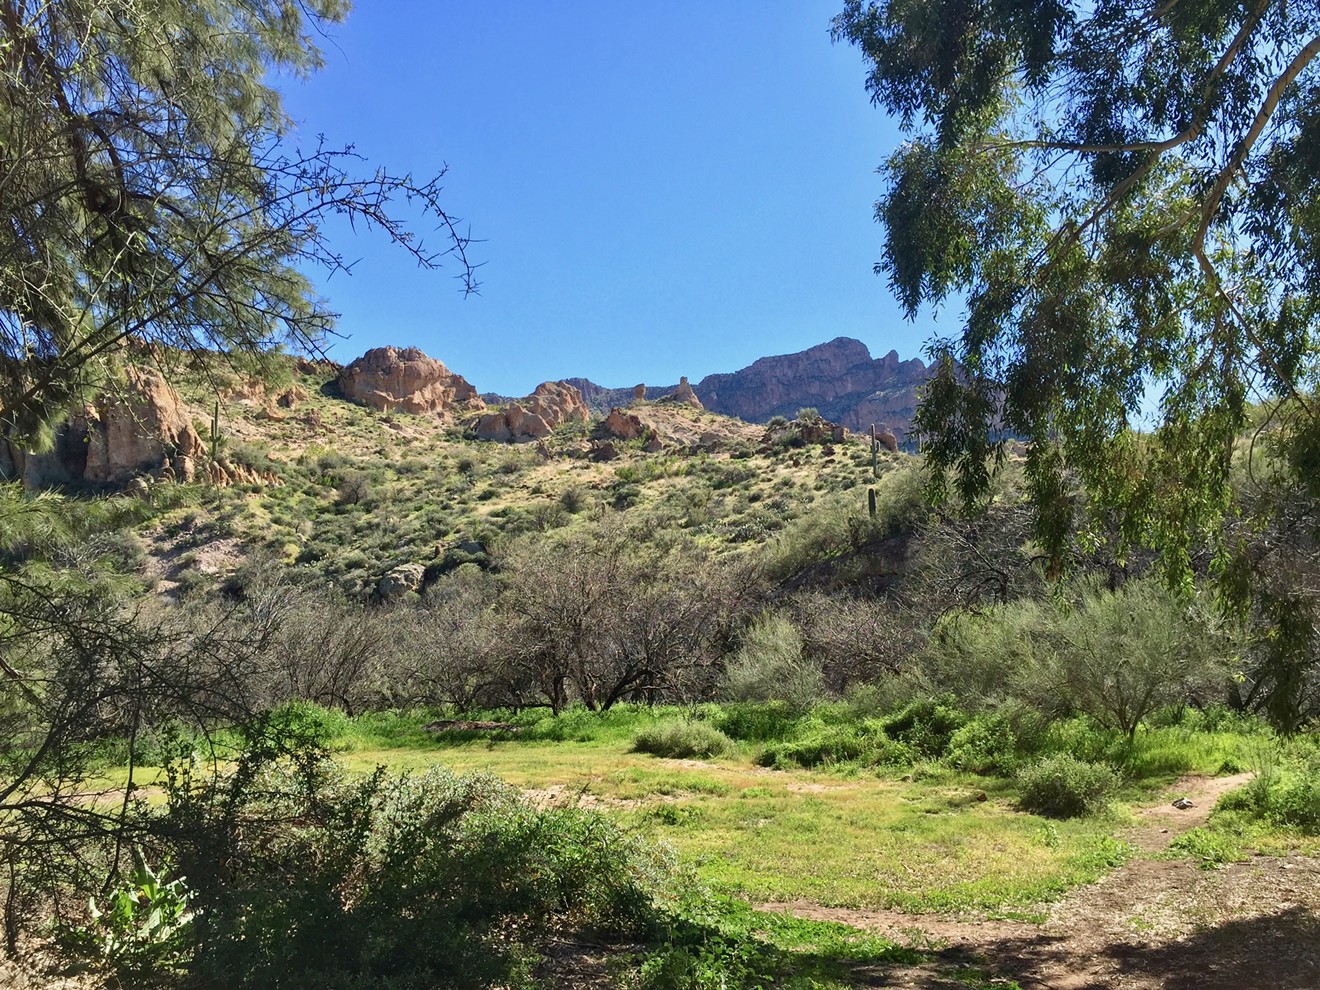 The Boyce Thompson Arboretum State Park is the largest and oldest botanical garden in Arizona.